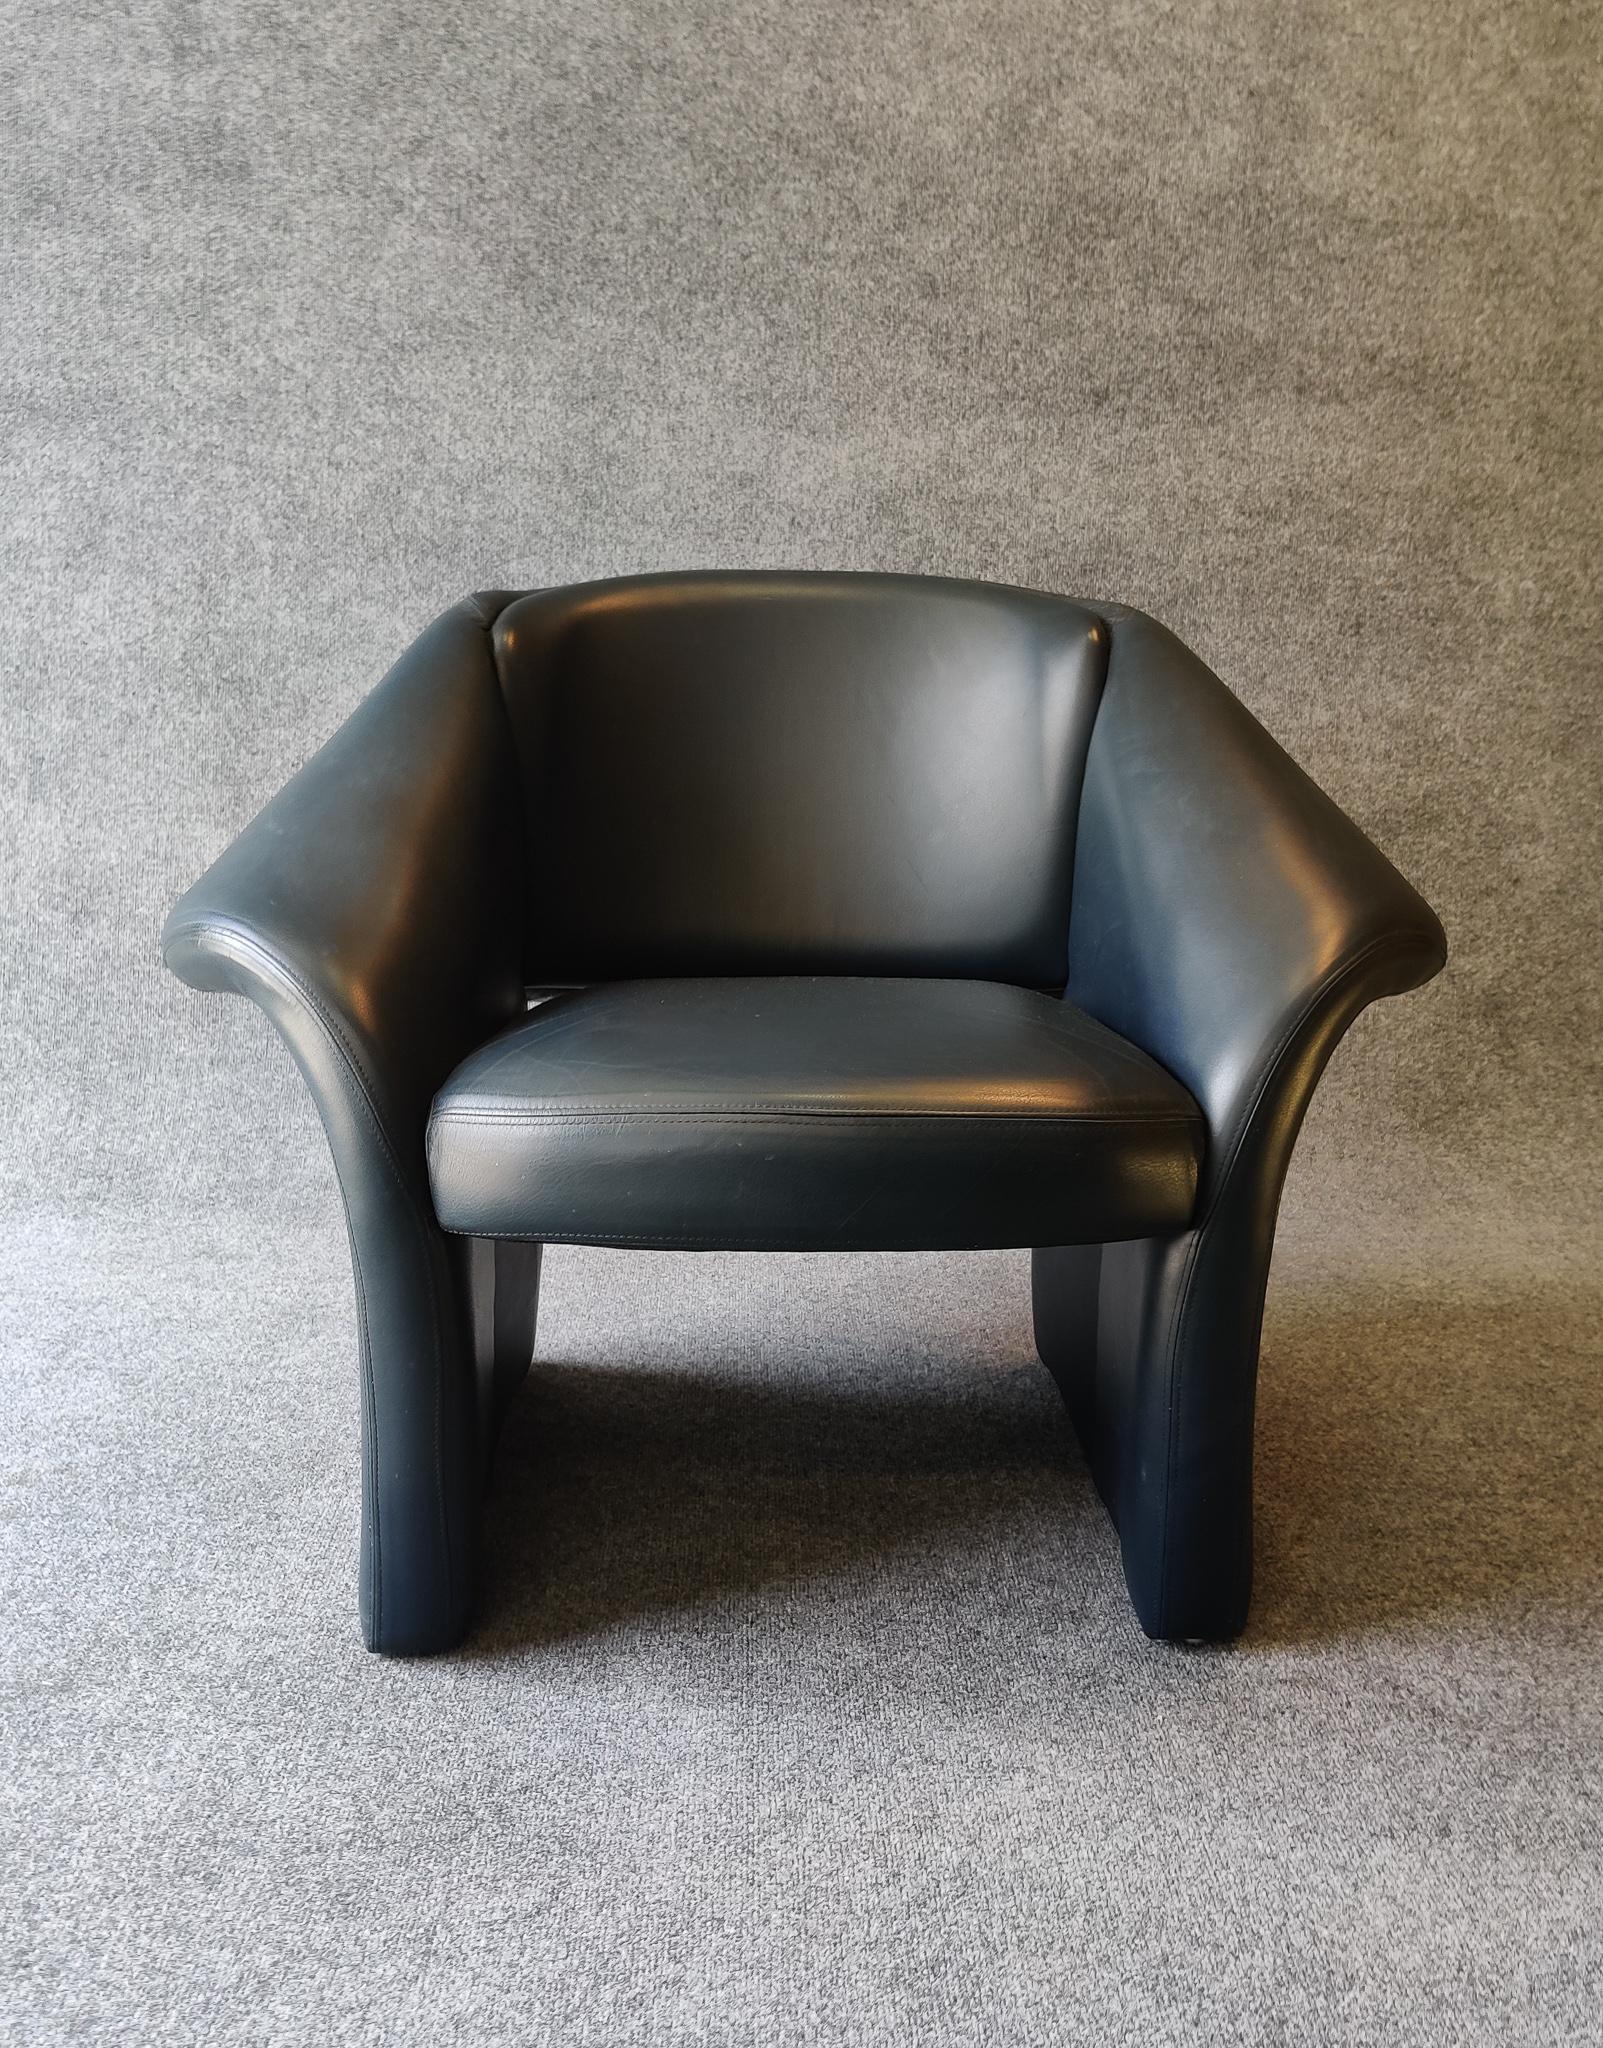 Post-Modern 1980s, Sculptural Dark Blue Leather Lounge Chair Pierre Paulin Style In Good Condition For Sale In Philadelphia, PA